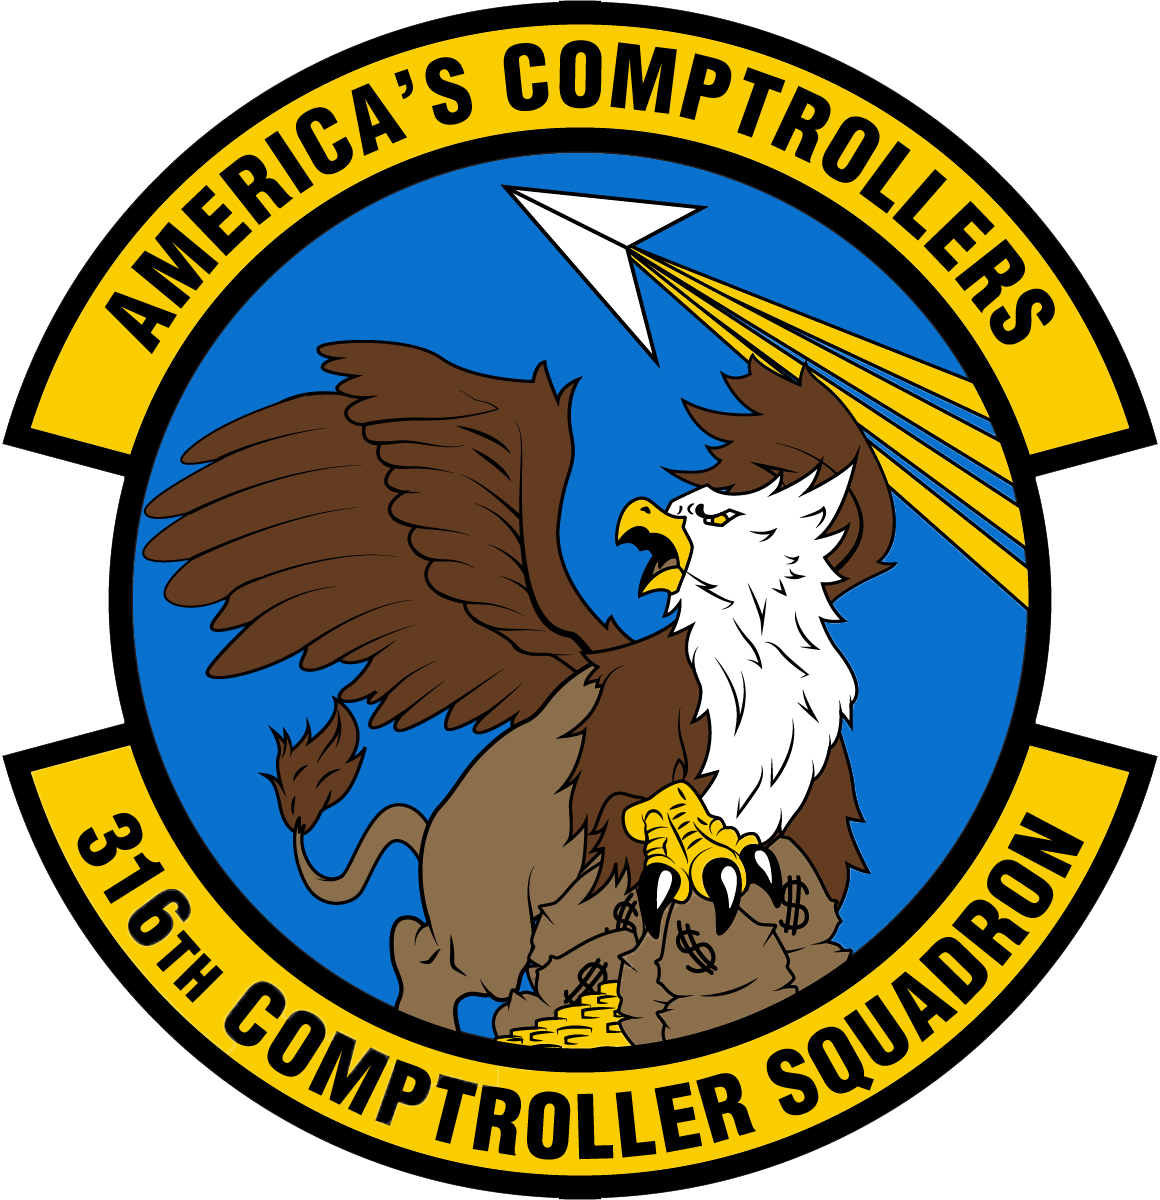 316th Comptroller Squadron patch